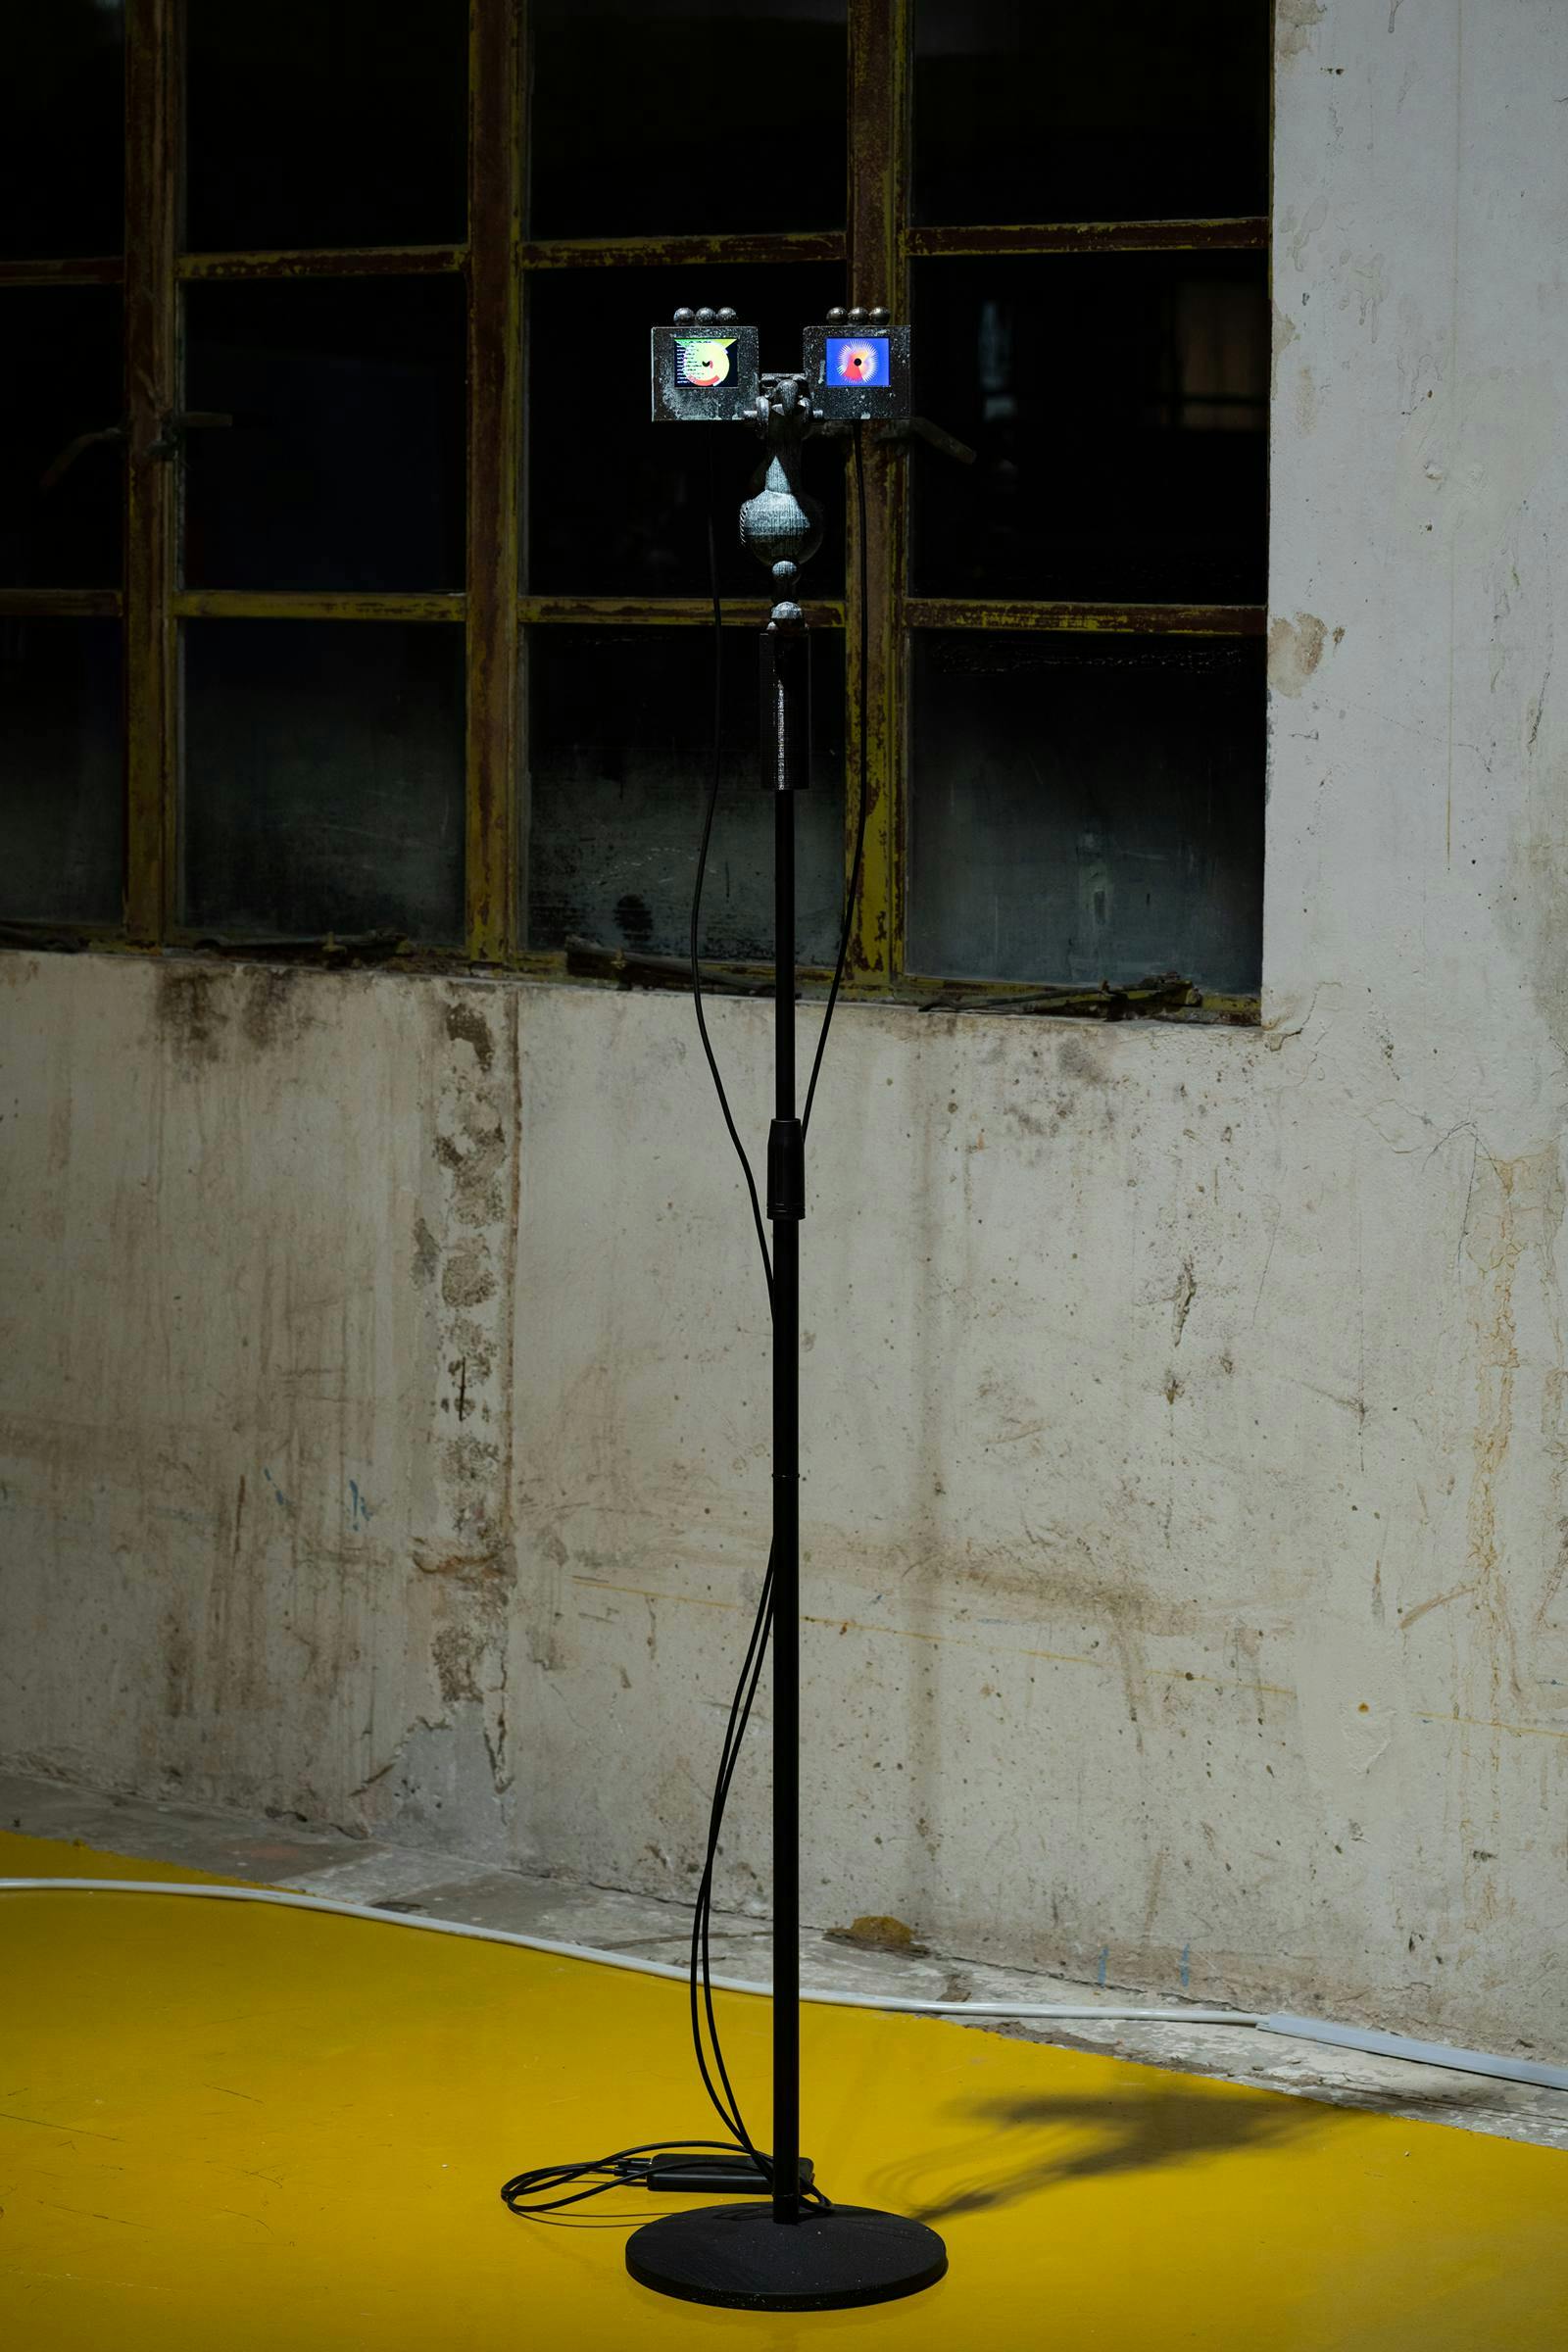 An image of the art work the messengers by Samson Young installed in an industrial building that has a yellow floor